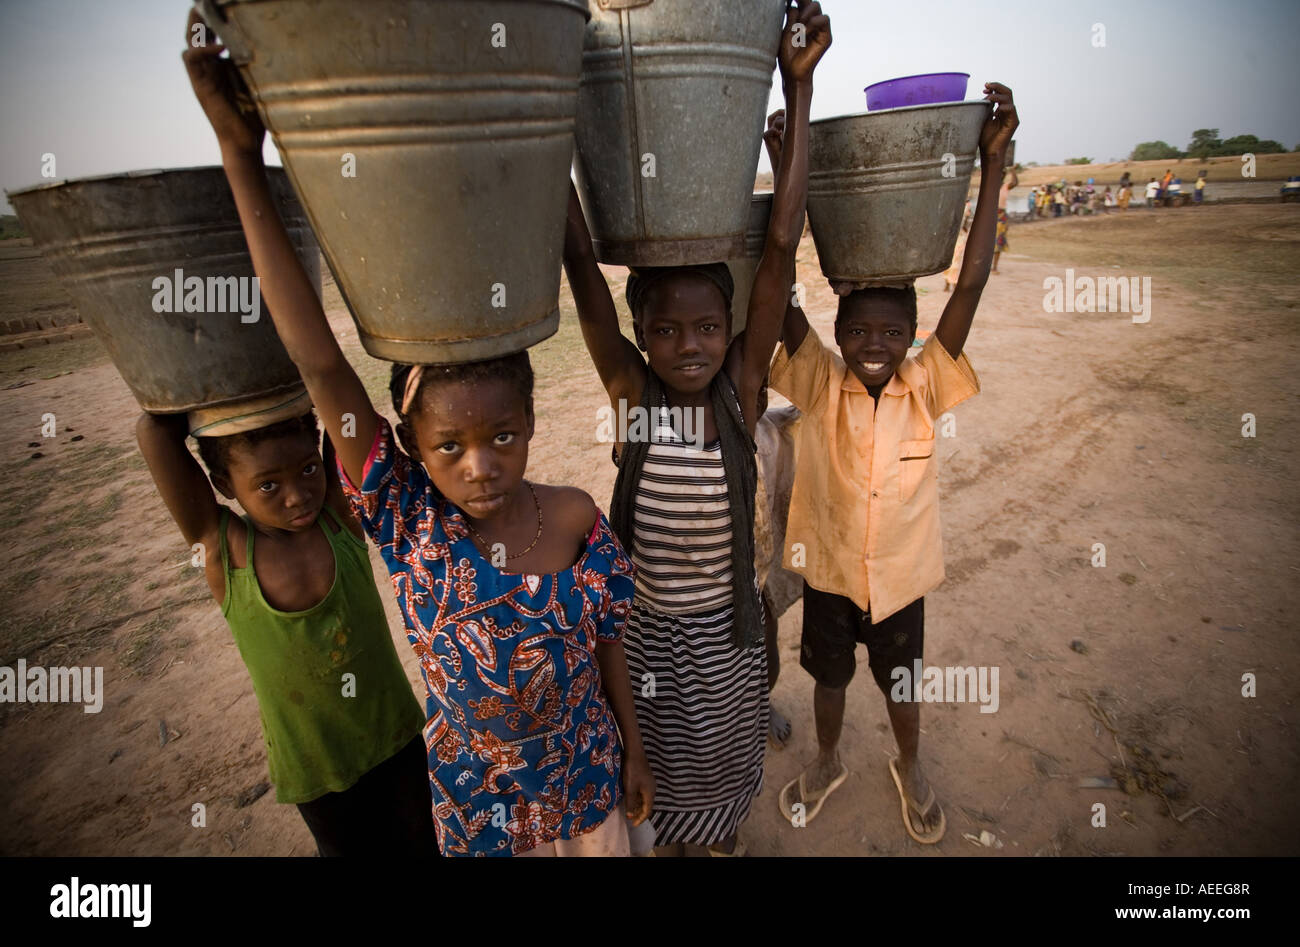 Children carrying water buckets on their heads Stock Photo - Alamy